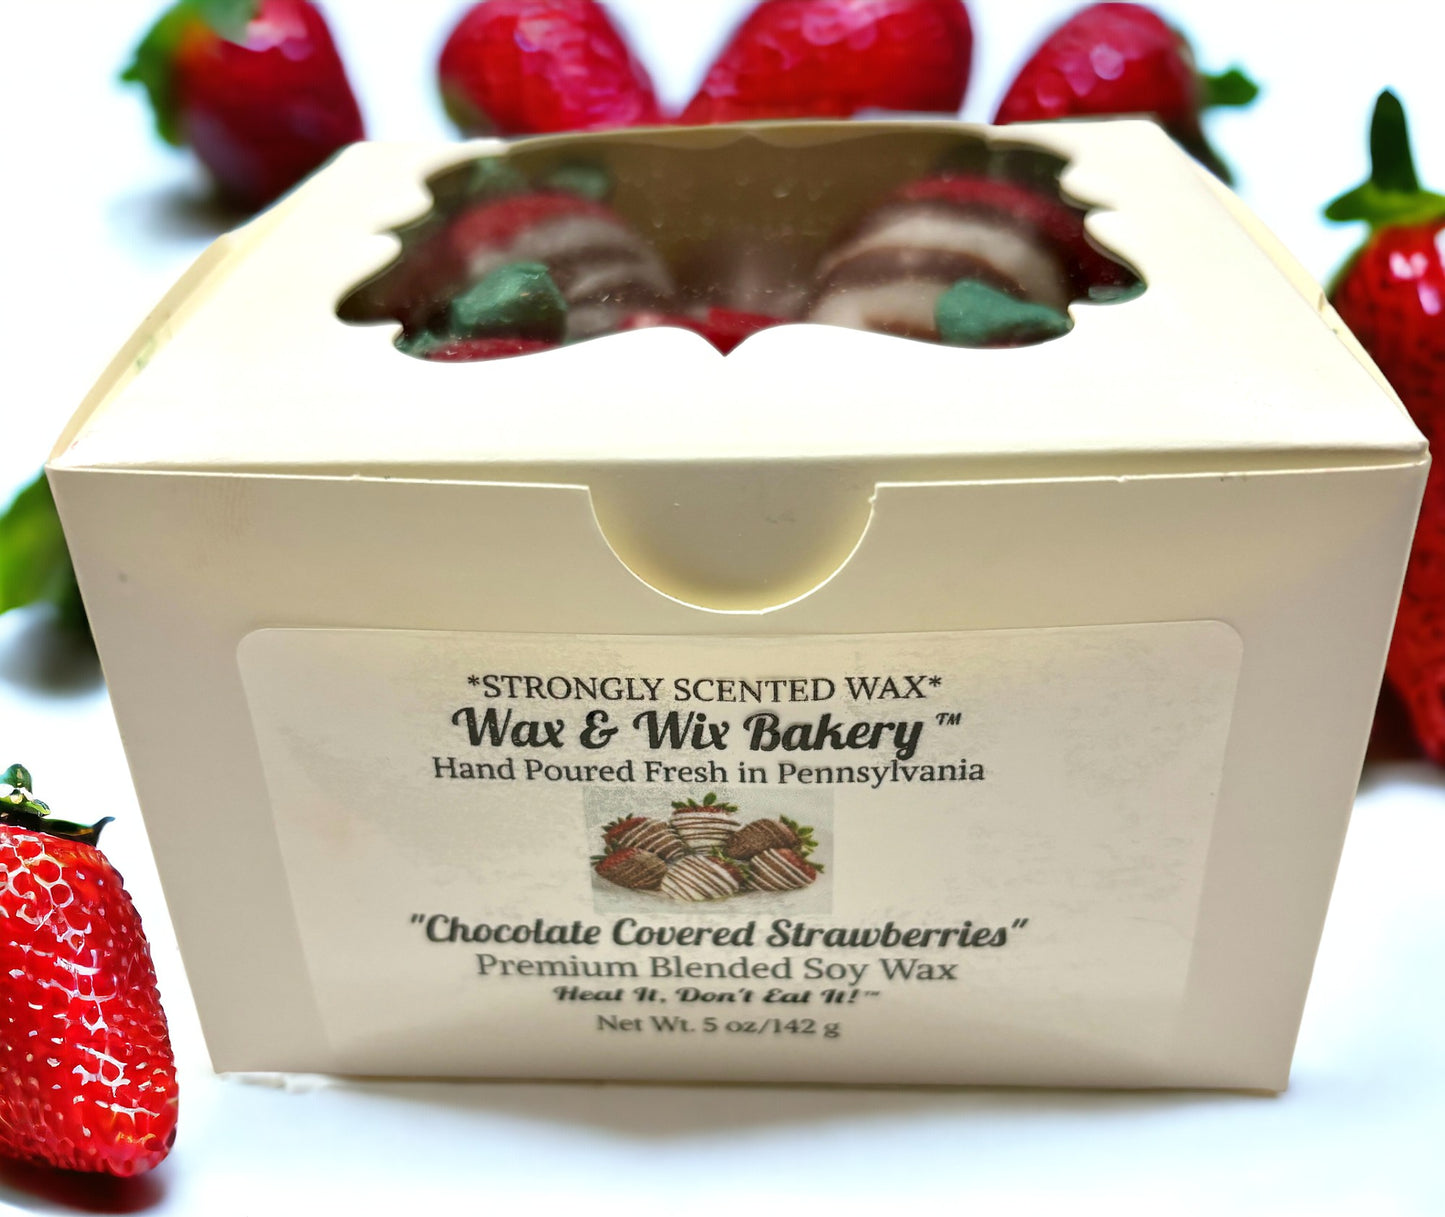 Chocolate Covered Strawberries and Hearts Wax Melts. 5 Oz. Strongly Scented Soy Wax. Wax Melts/Wax Tarts for Wax Warmers.